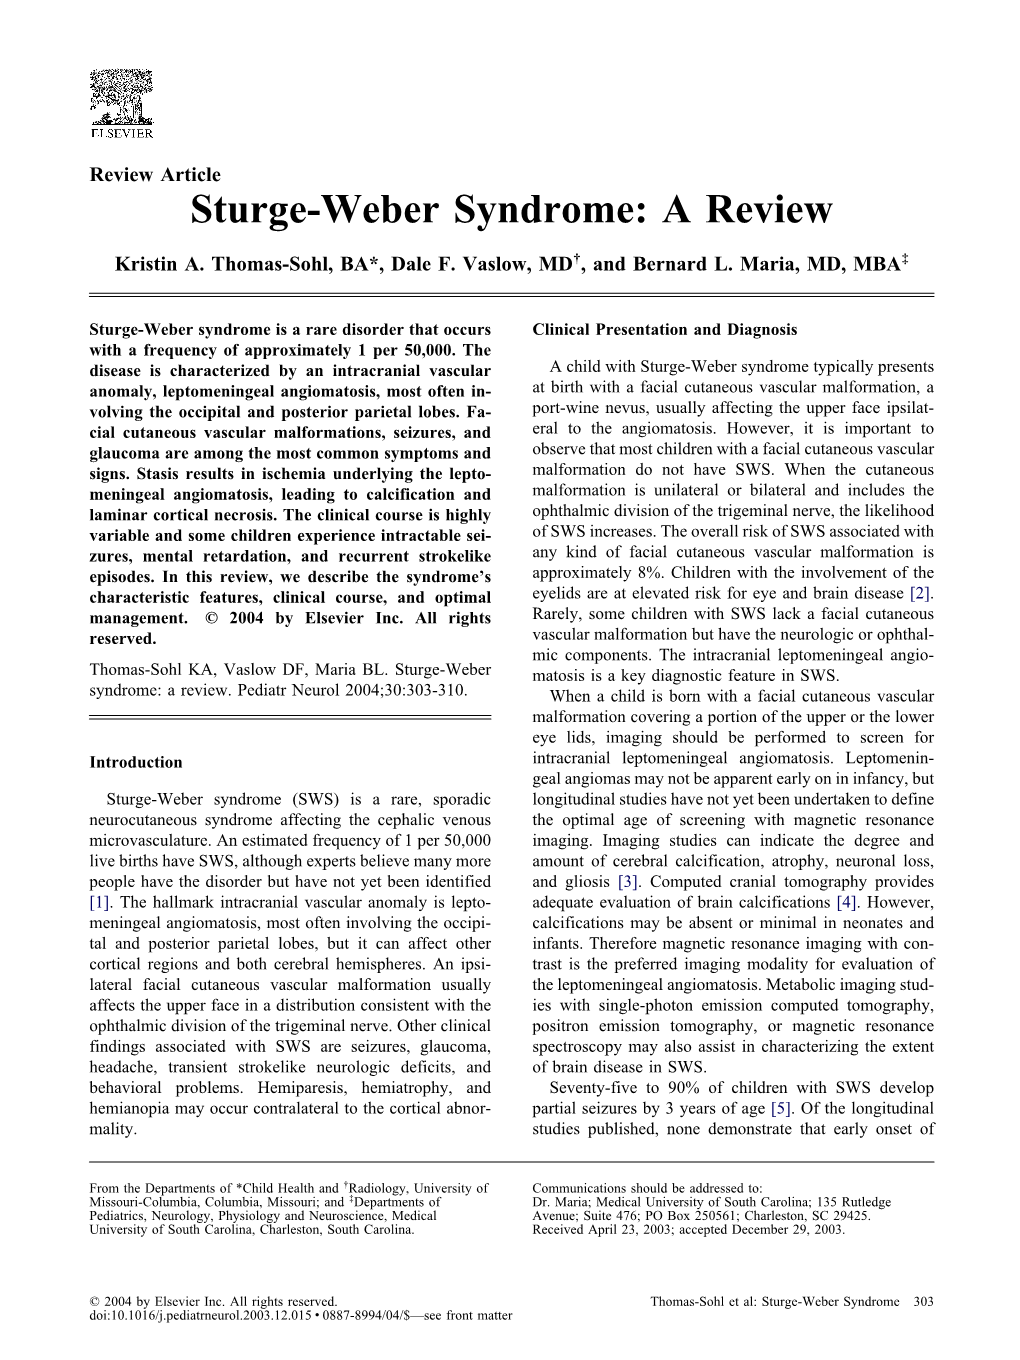 Sturge-Weber Syndrome: a Review